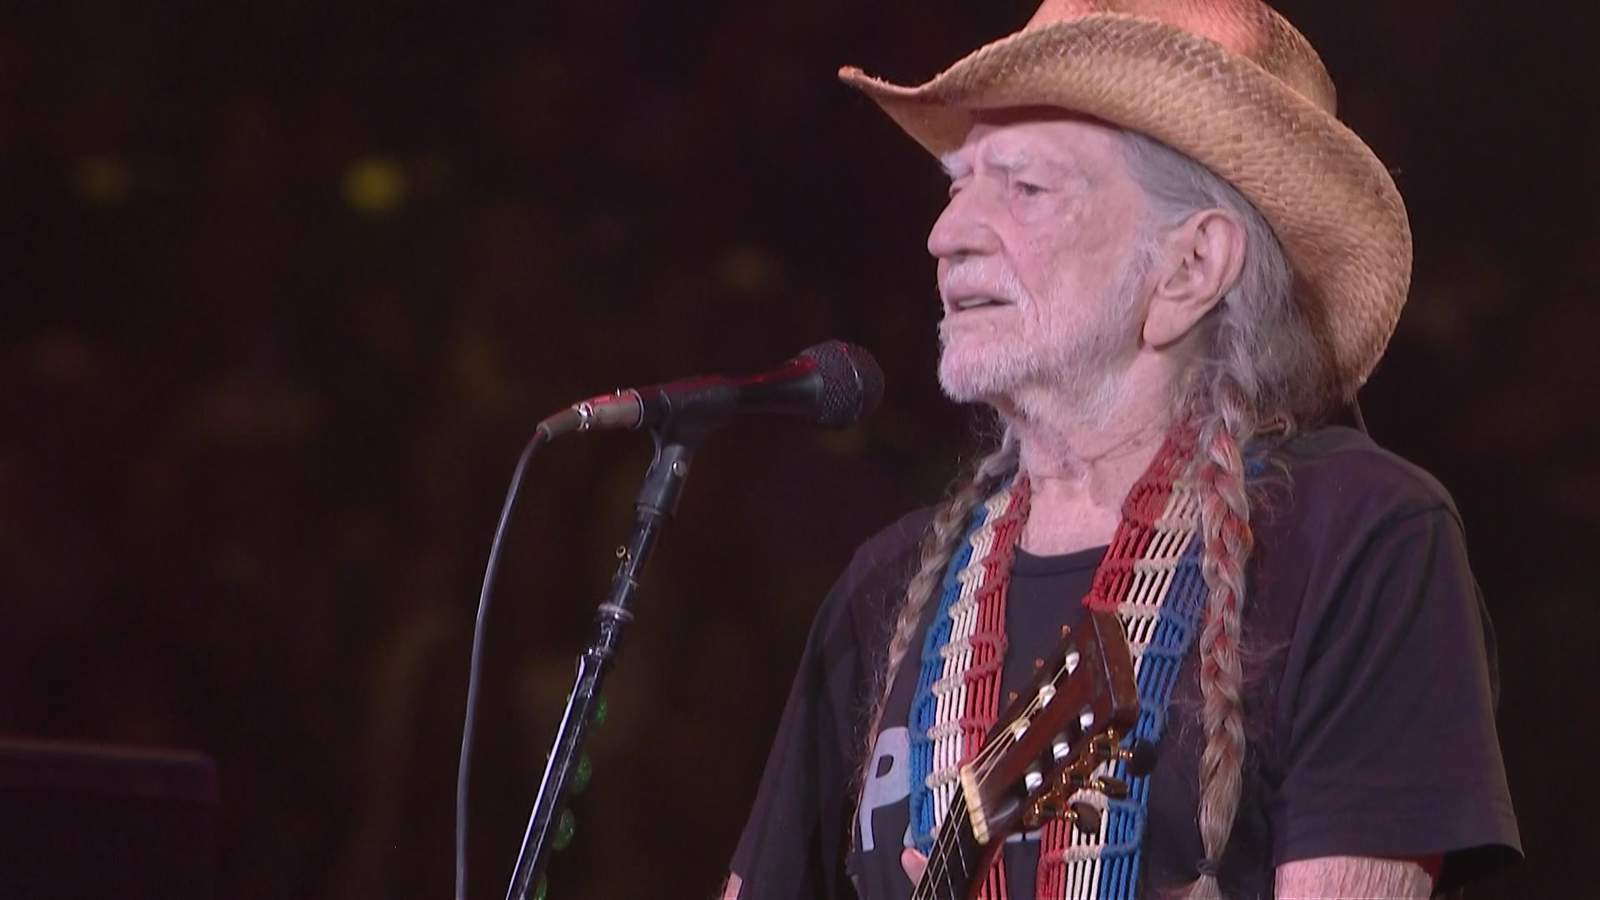 willie nelson cries during performance